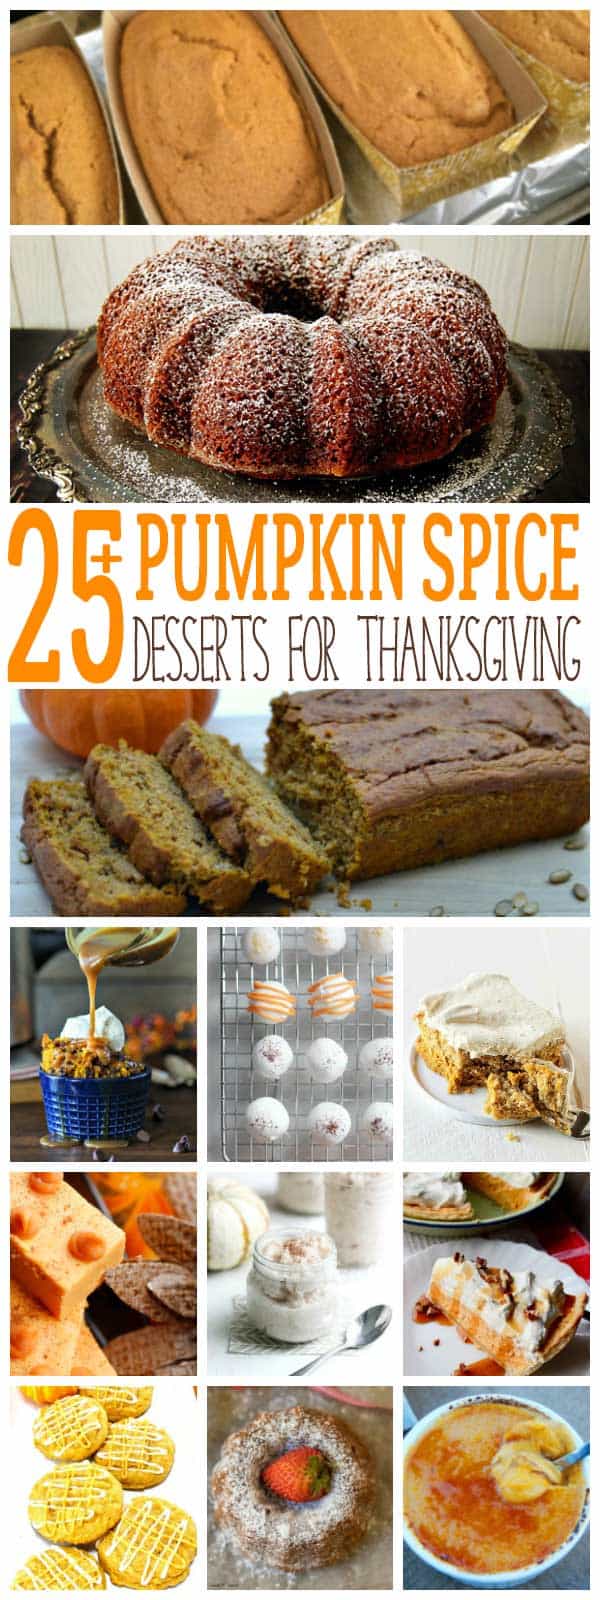 Get stocked up on Pumpkin Spice and Puree as these delicious dessert recipes will inspire you to bake and help you meal plan for Thanksgiving and fall.